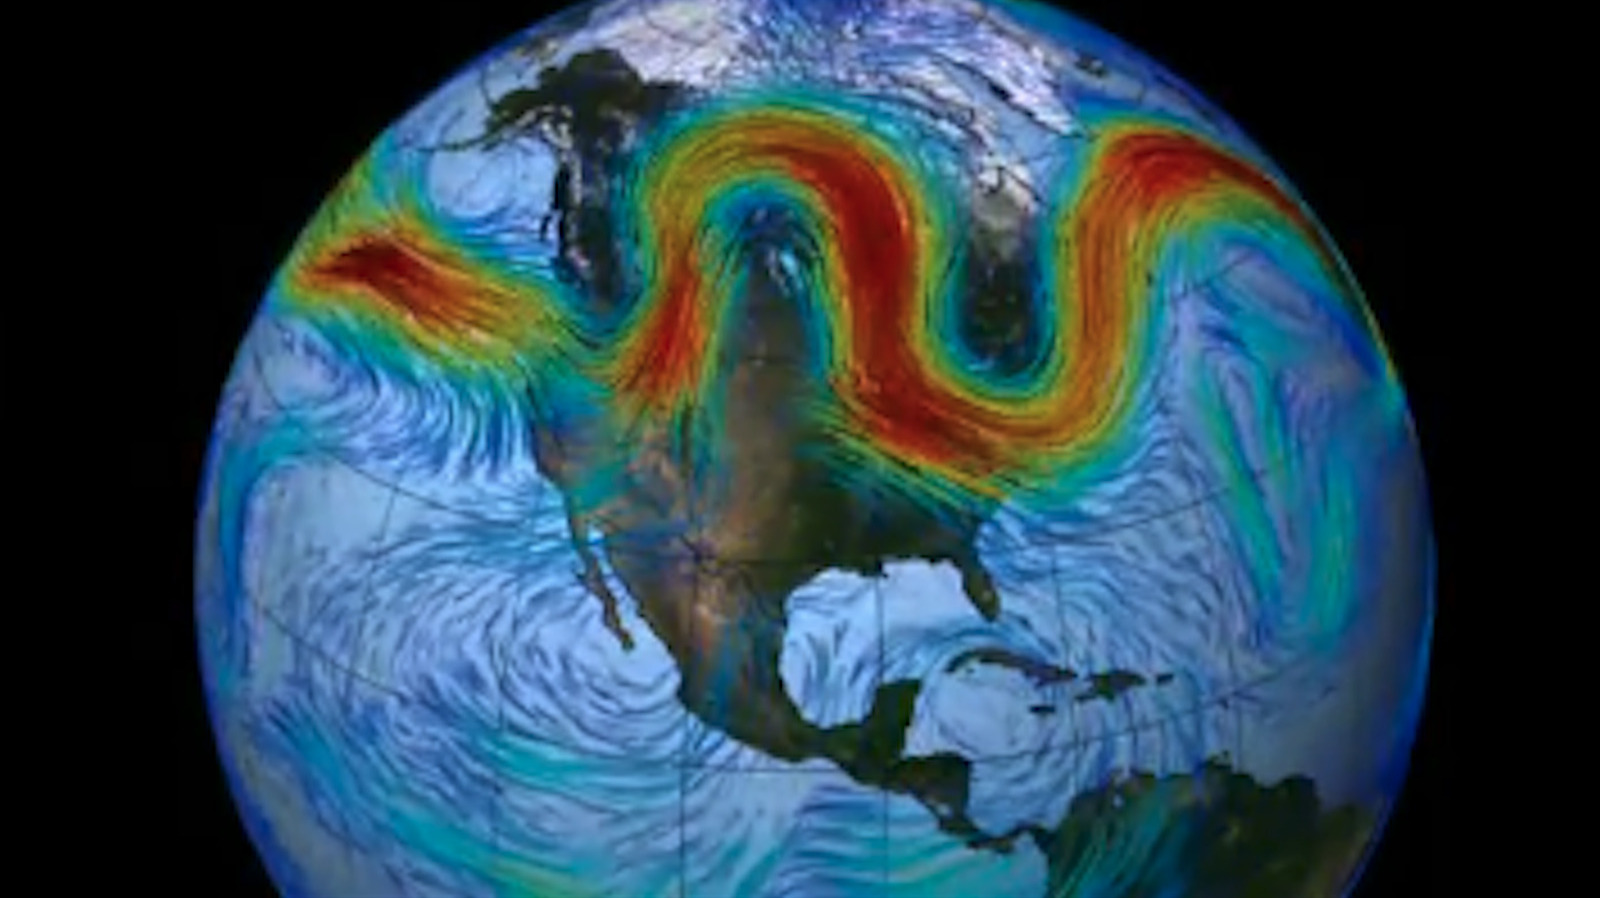 What Are Rossby Waves And Why Are They Affecting Our Weather?